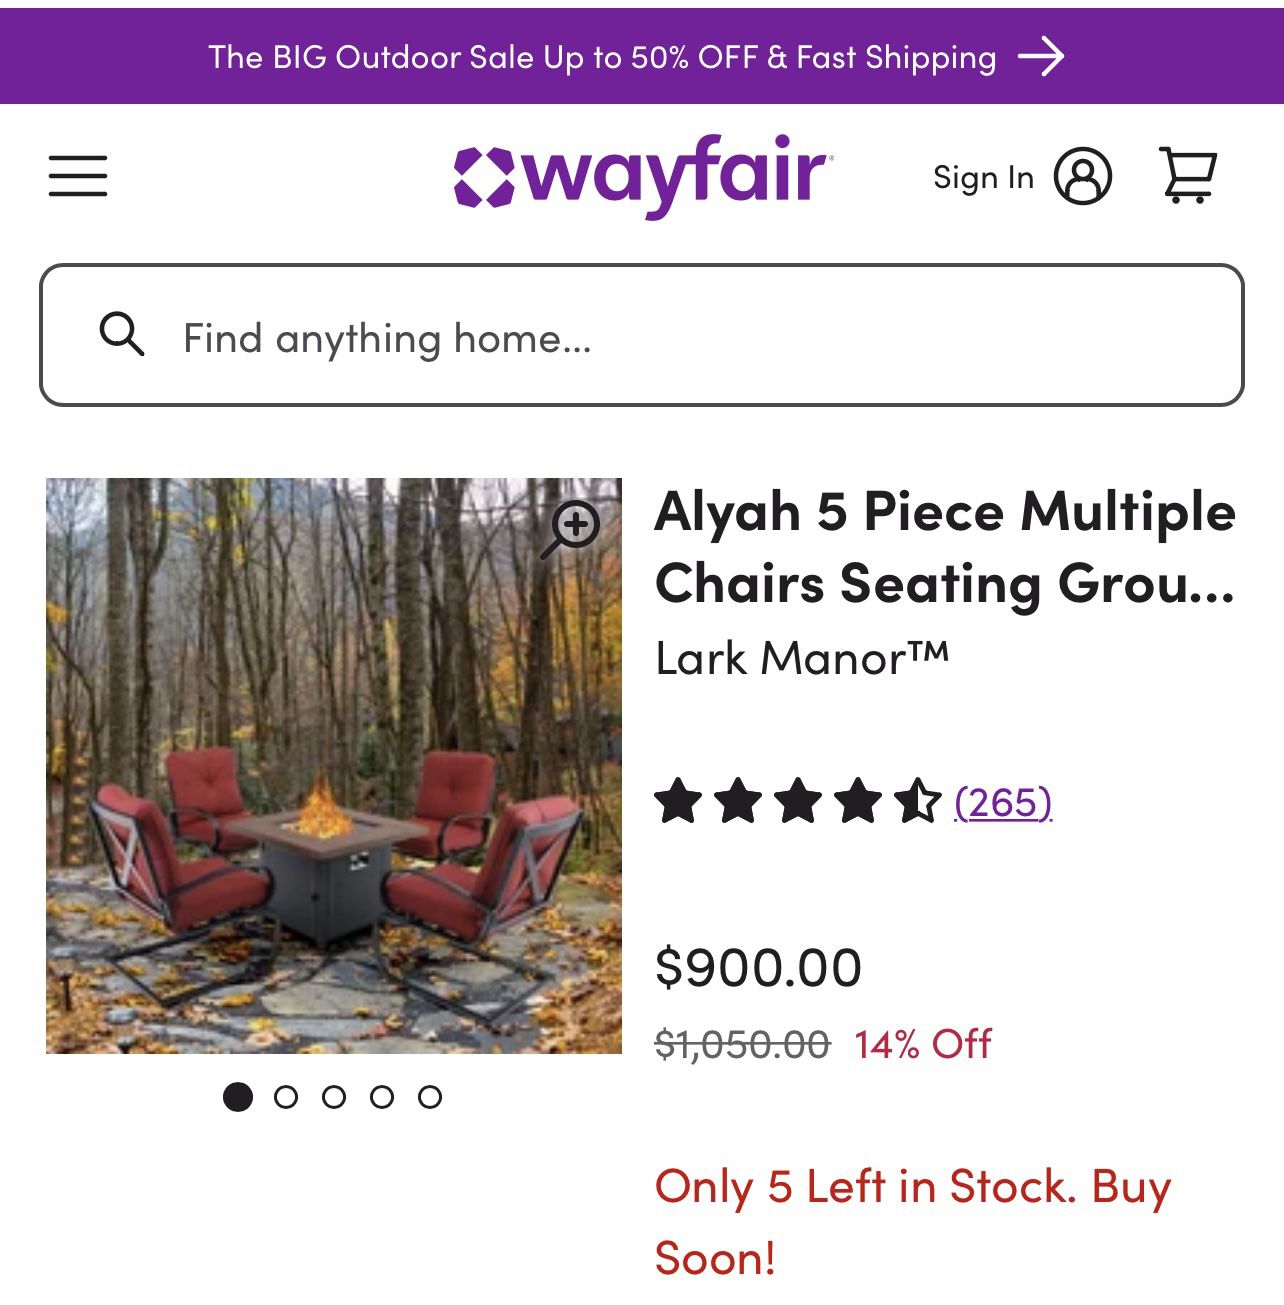 Alyah 8 Piece Multiple Chairs Seating Group with Cushions